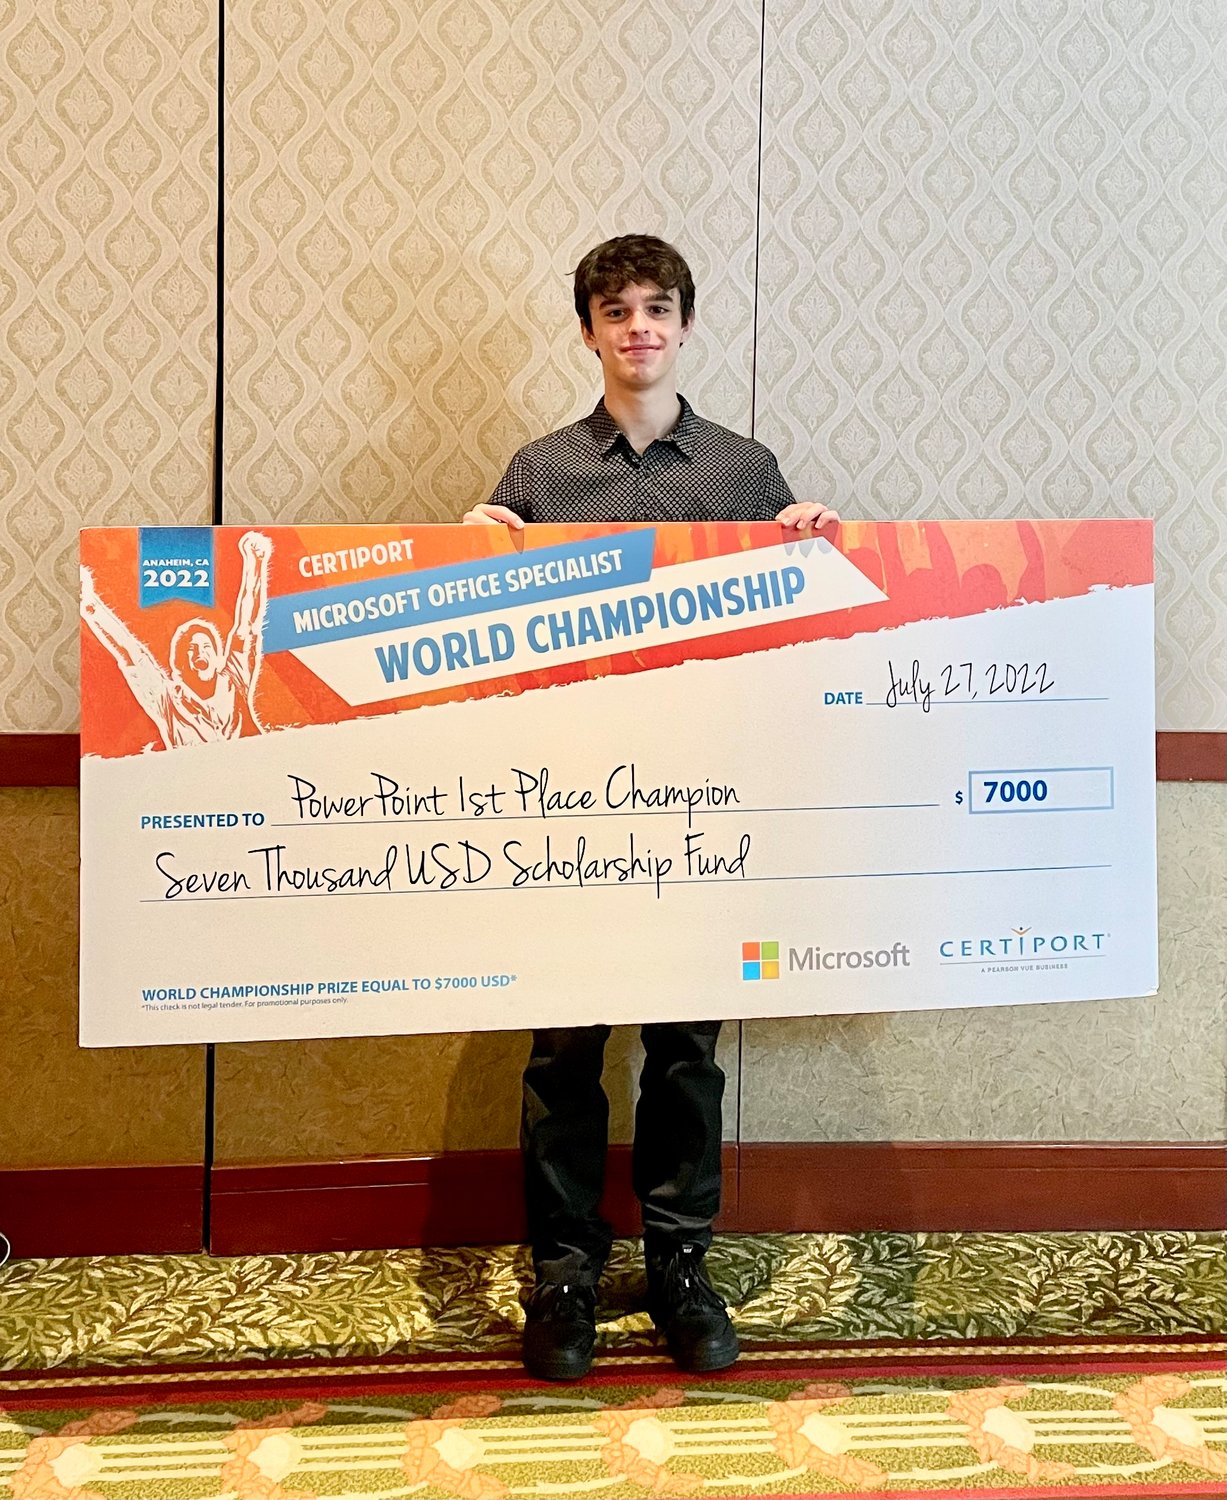 Tristan Pesqueira won the 2022 Microsoft Office Specialist World Championship for PowerPoint in late July after winning the national competition in June.